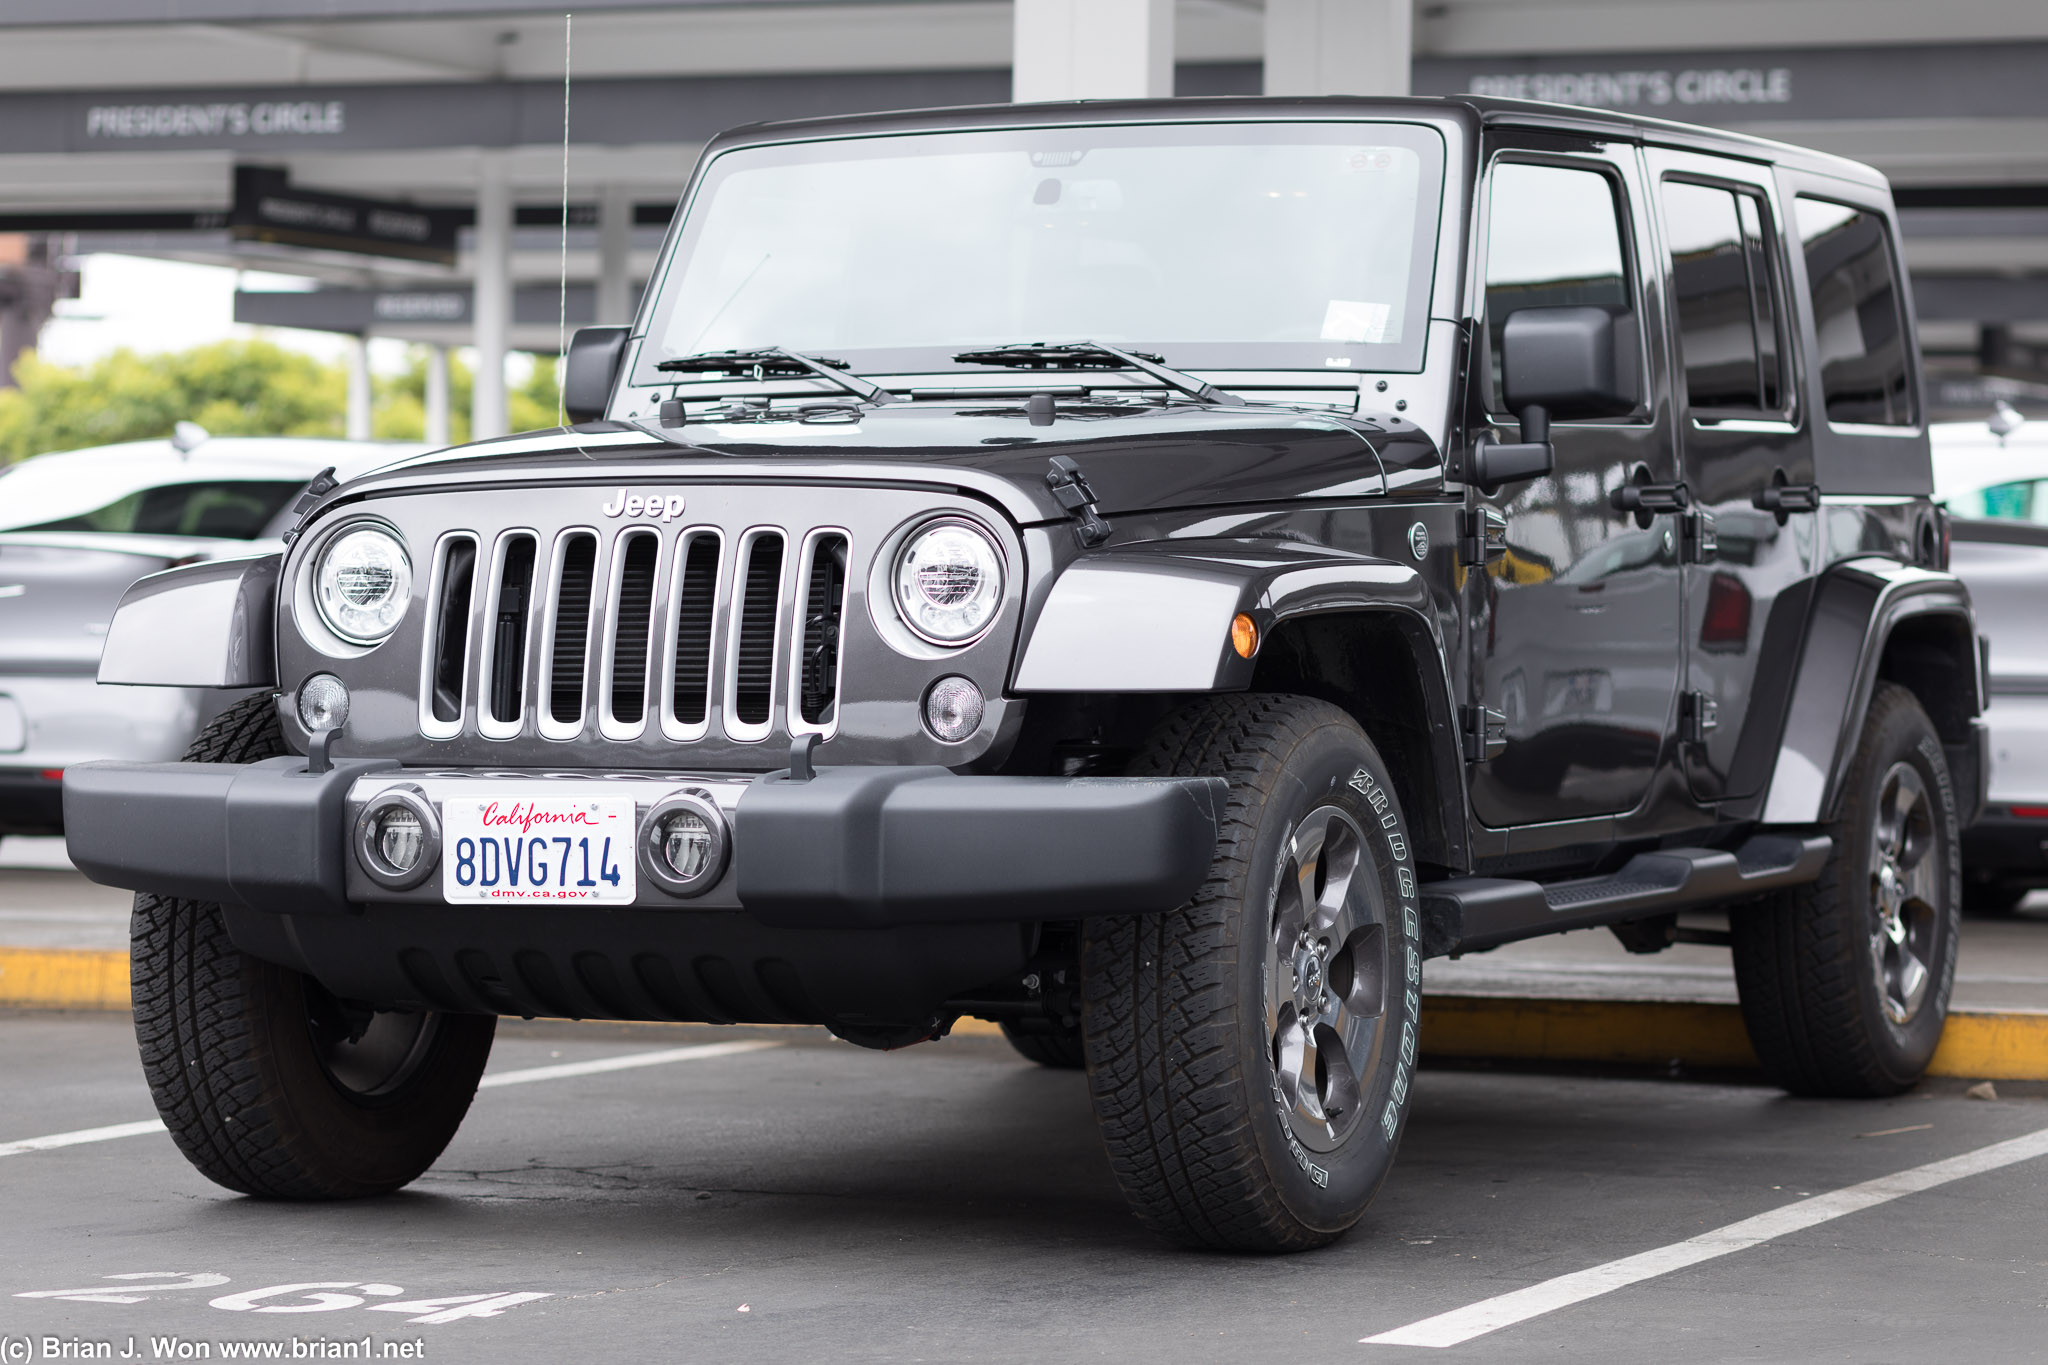 And a Jeep Wrangler Unlimited Sahara. This is a little more expected.